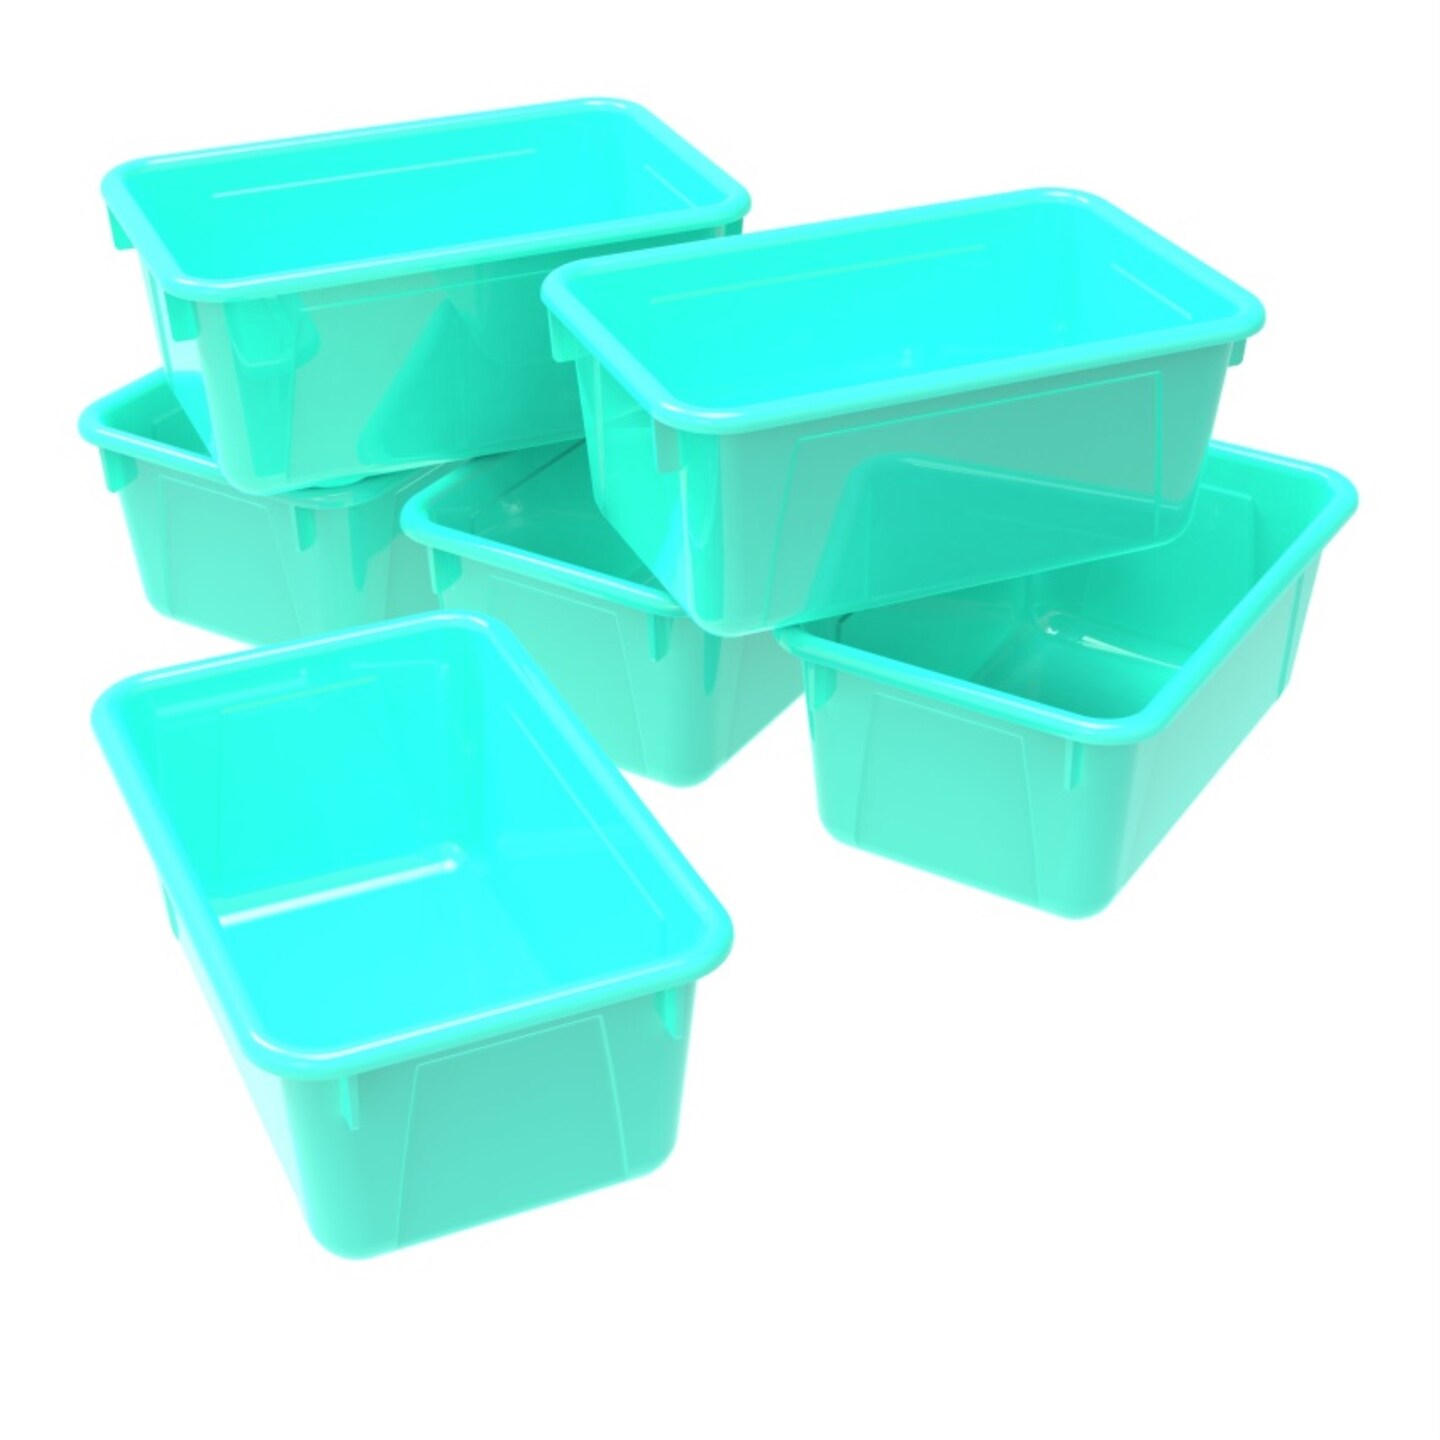 Small Cubby Bin, Classroom Teal (Case of 5)